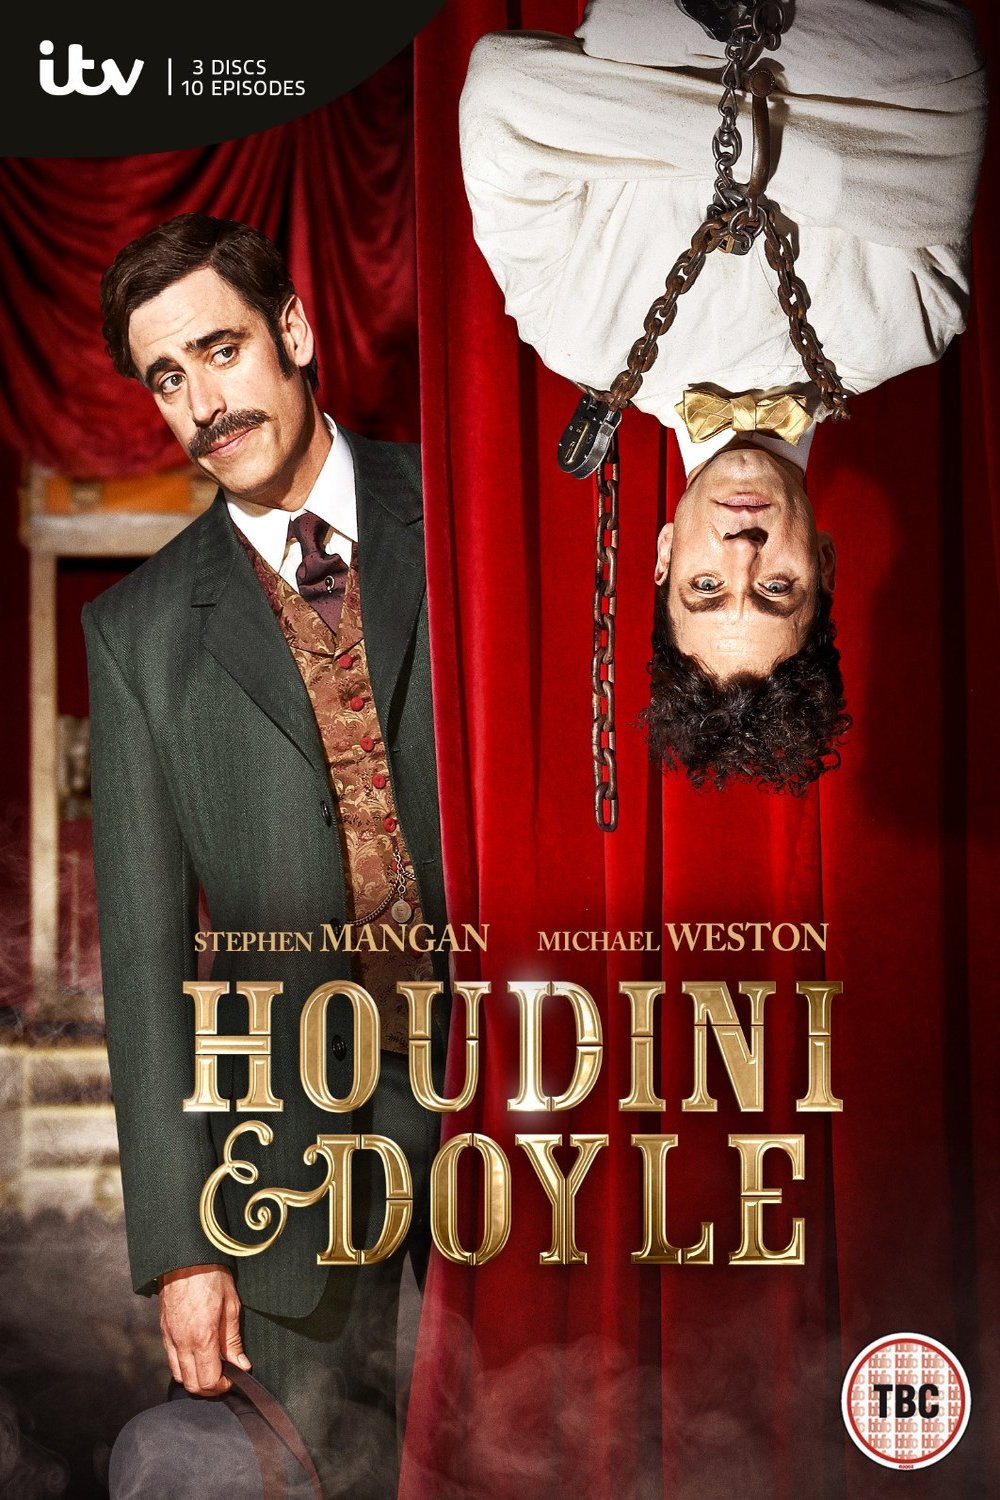 Poster of the movie Houdini and Doyle